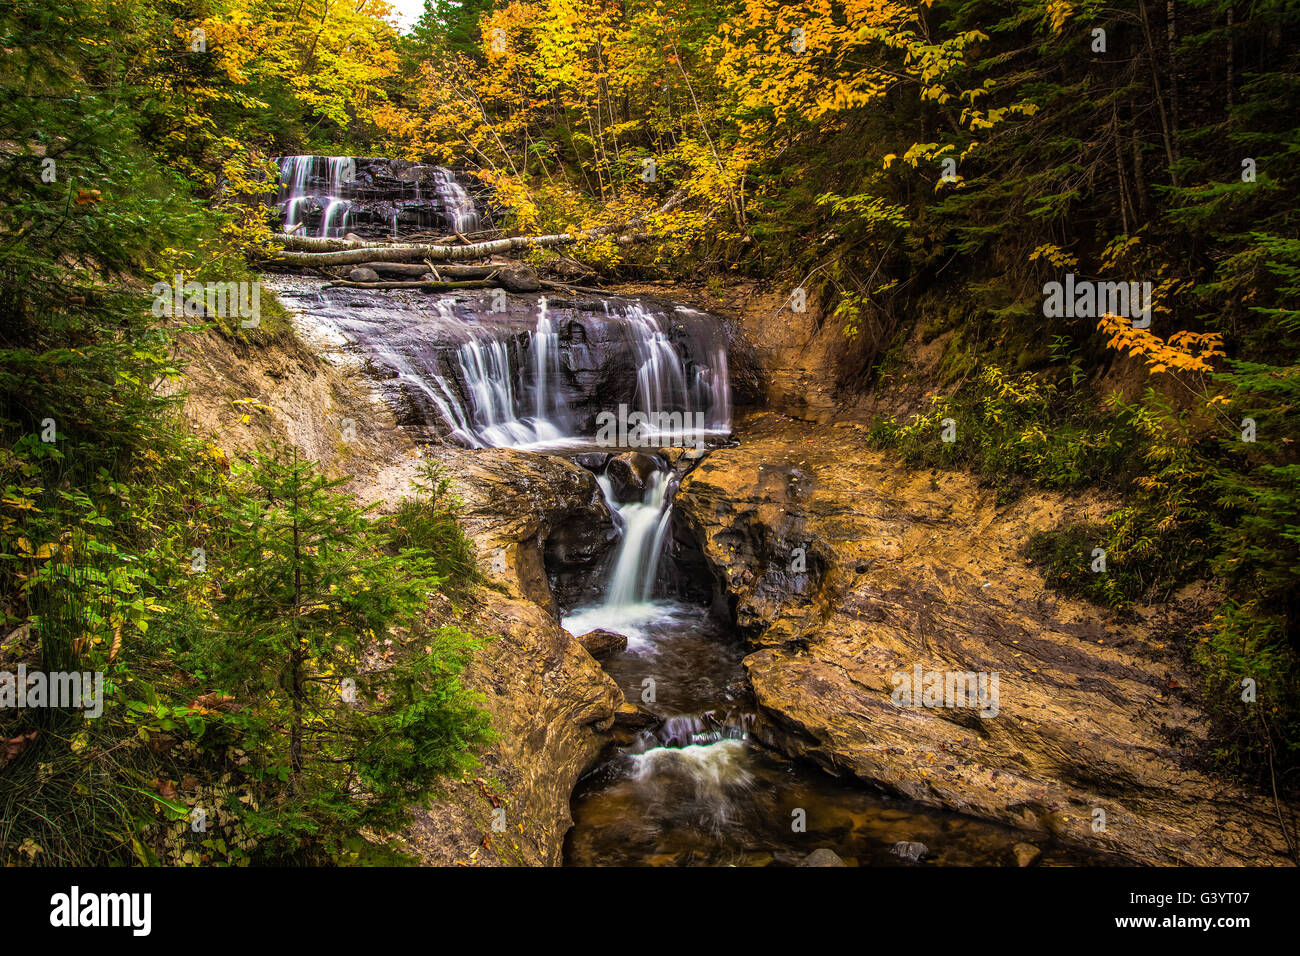 Autumn Waterfall. Sable Falls surrounded by fall foliage in the Pictured Rocks National Lake shore in Michigan. Stock Photo